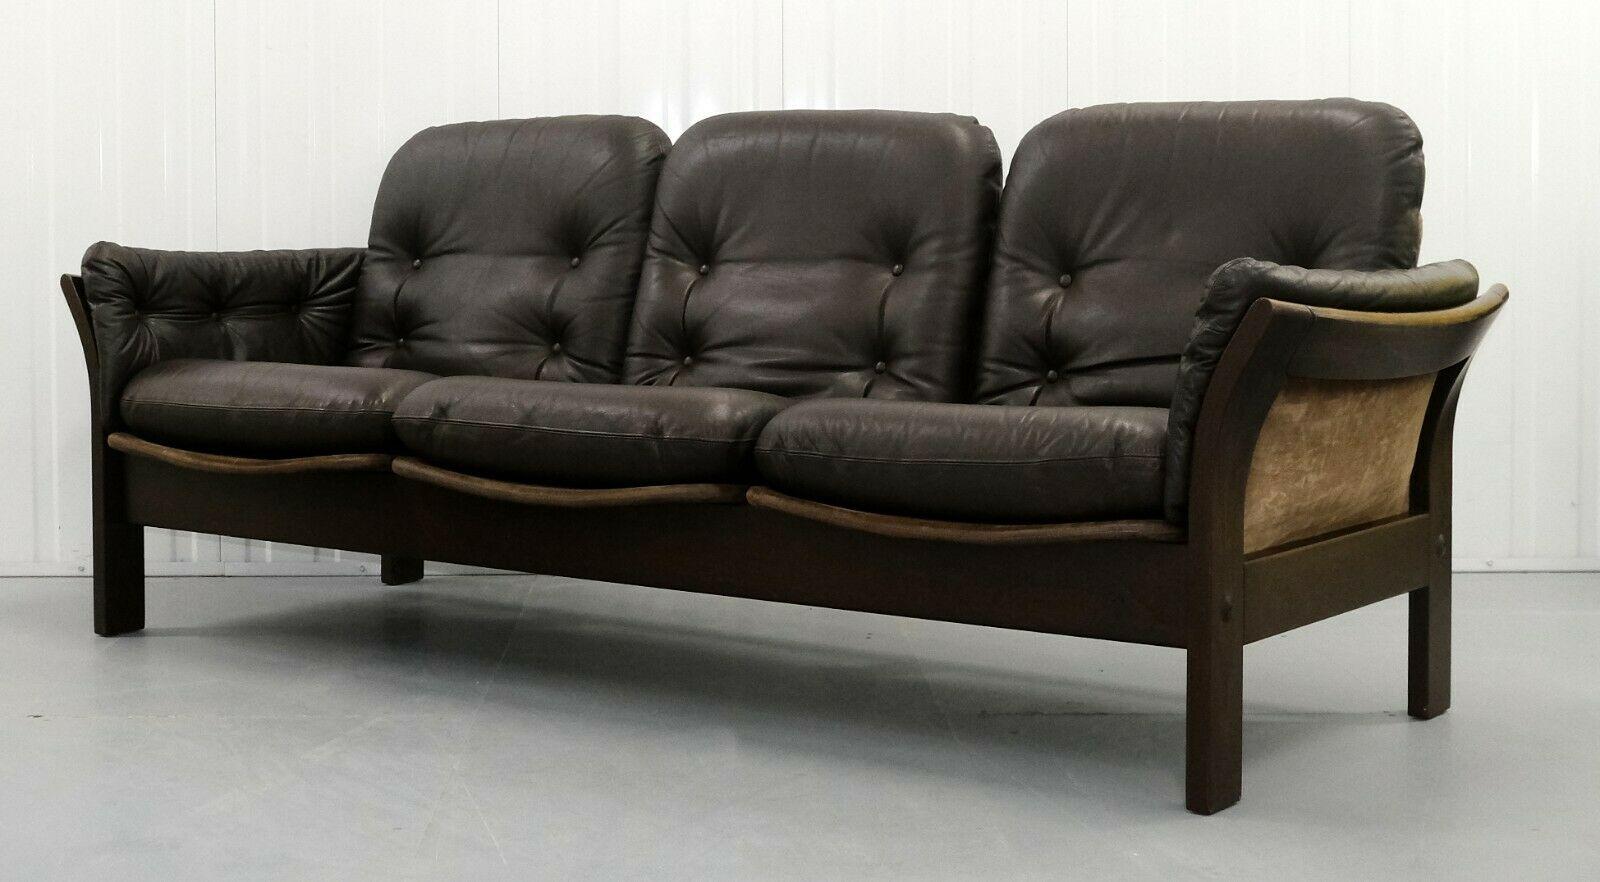 Mid-Century Modern Stunning Thams Kvalitet Brown Leather & Suede Three Seater Sofa Bentwood Frame For Sale